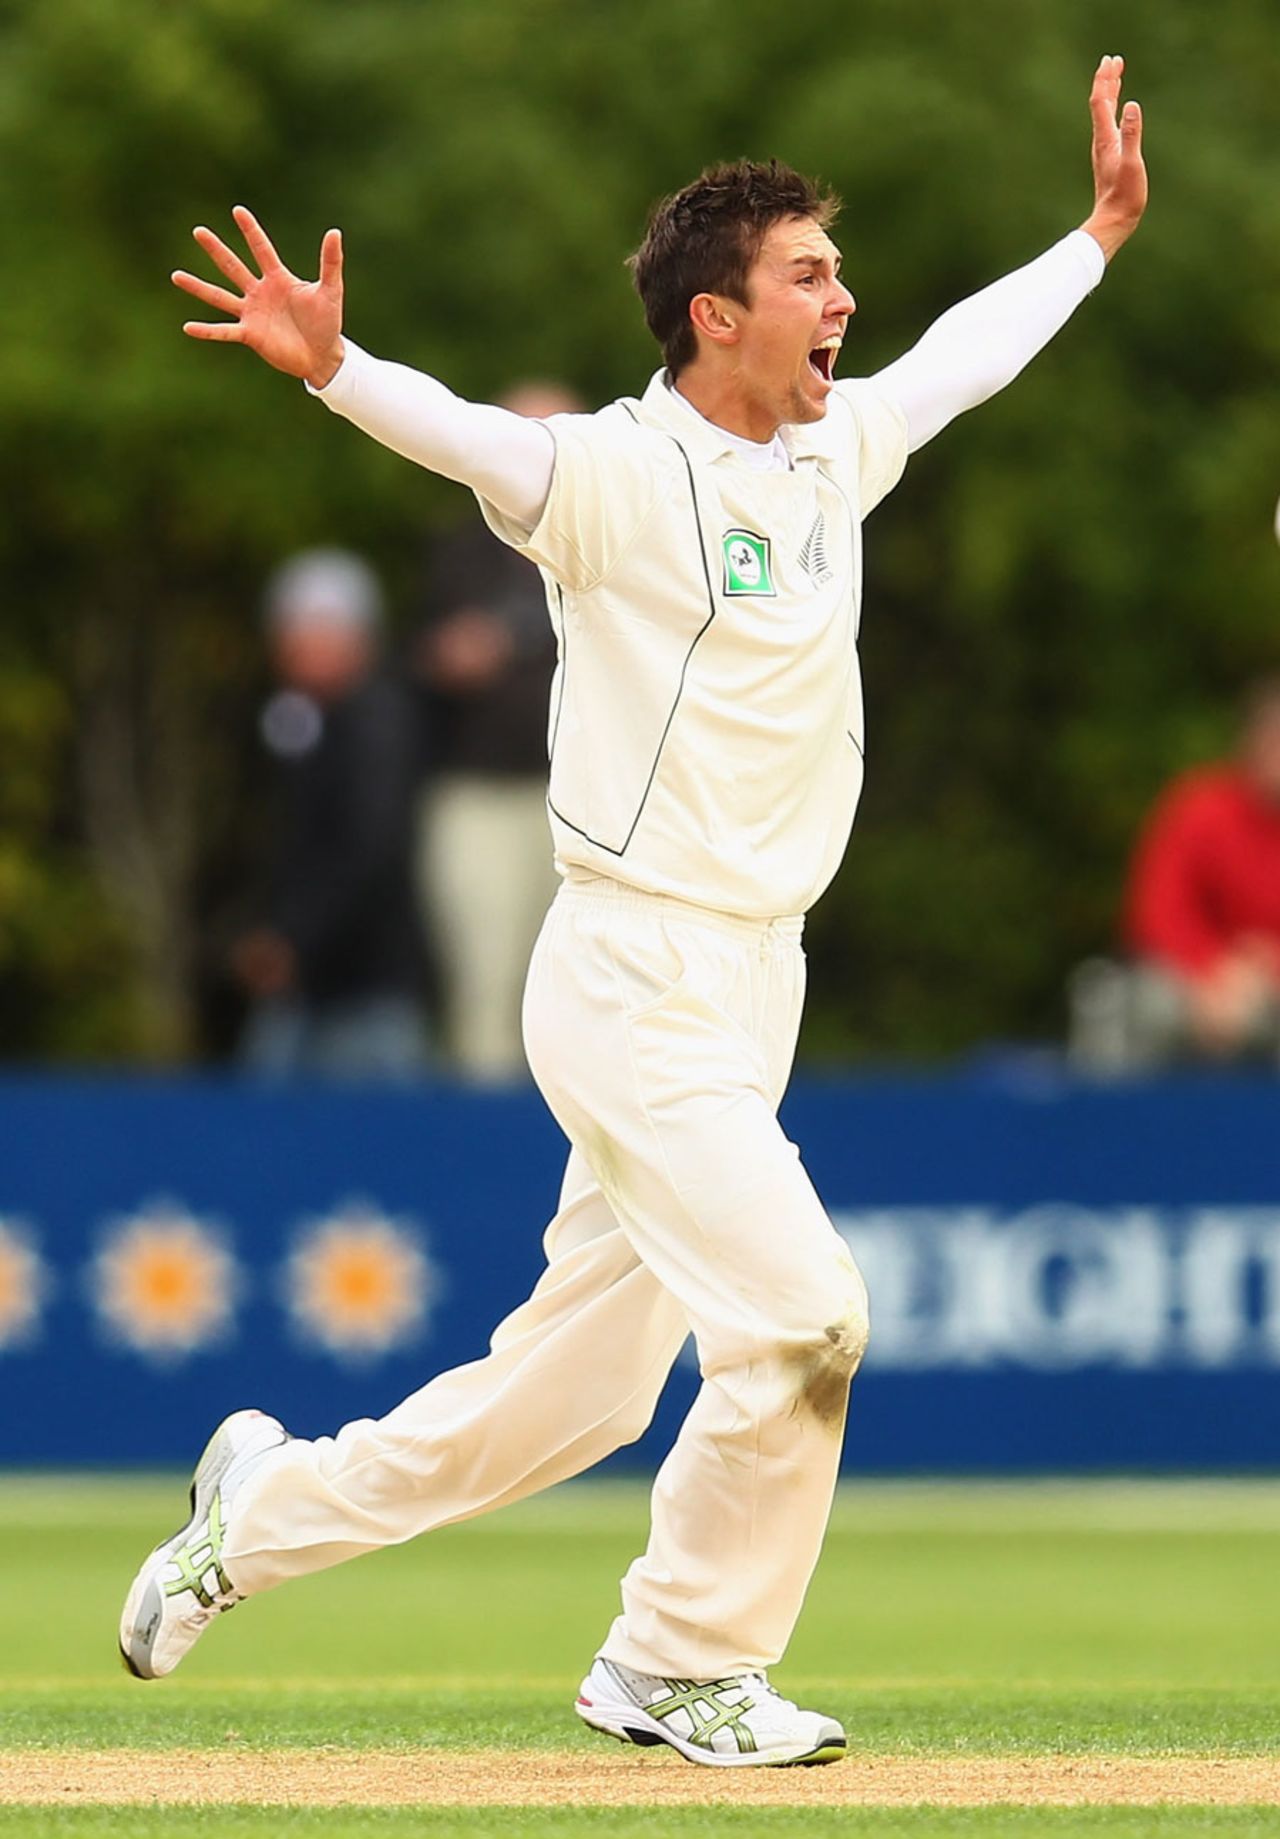 Trent Boult appeals successfully for Alviro Petersen's wicket, New Zealand v South Africa, 1st Test, Dunedin, 1st day, March 7, 2012